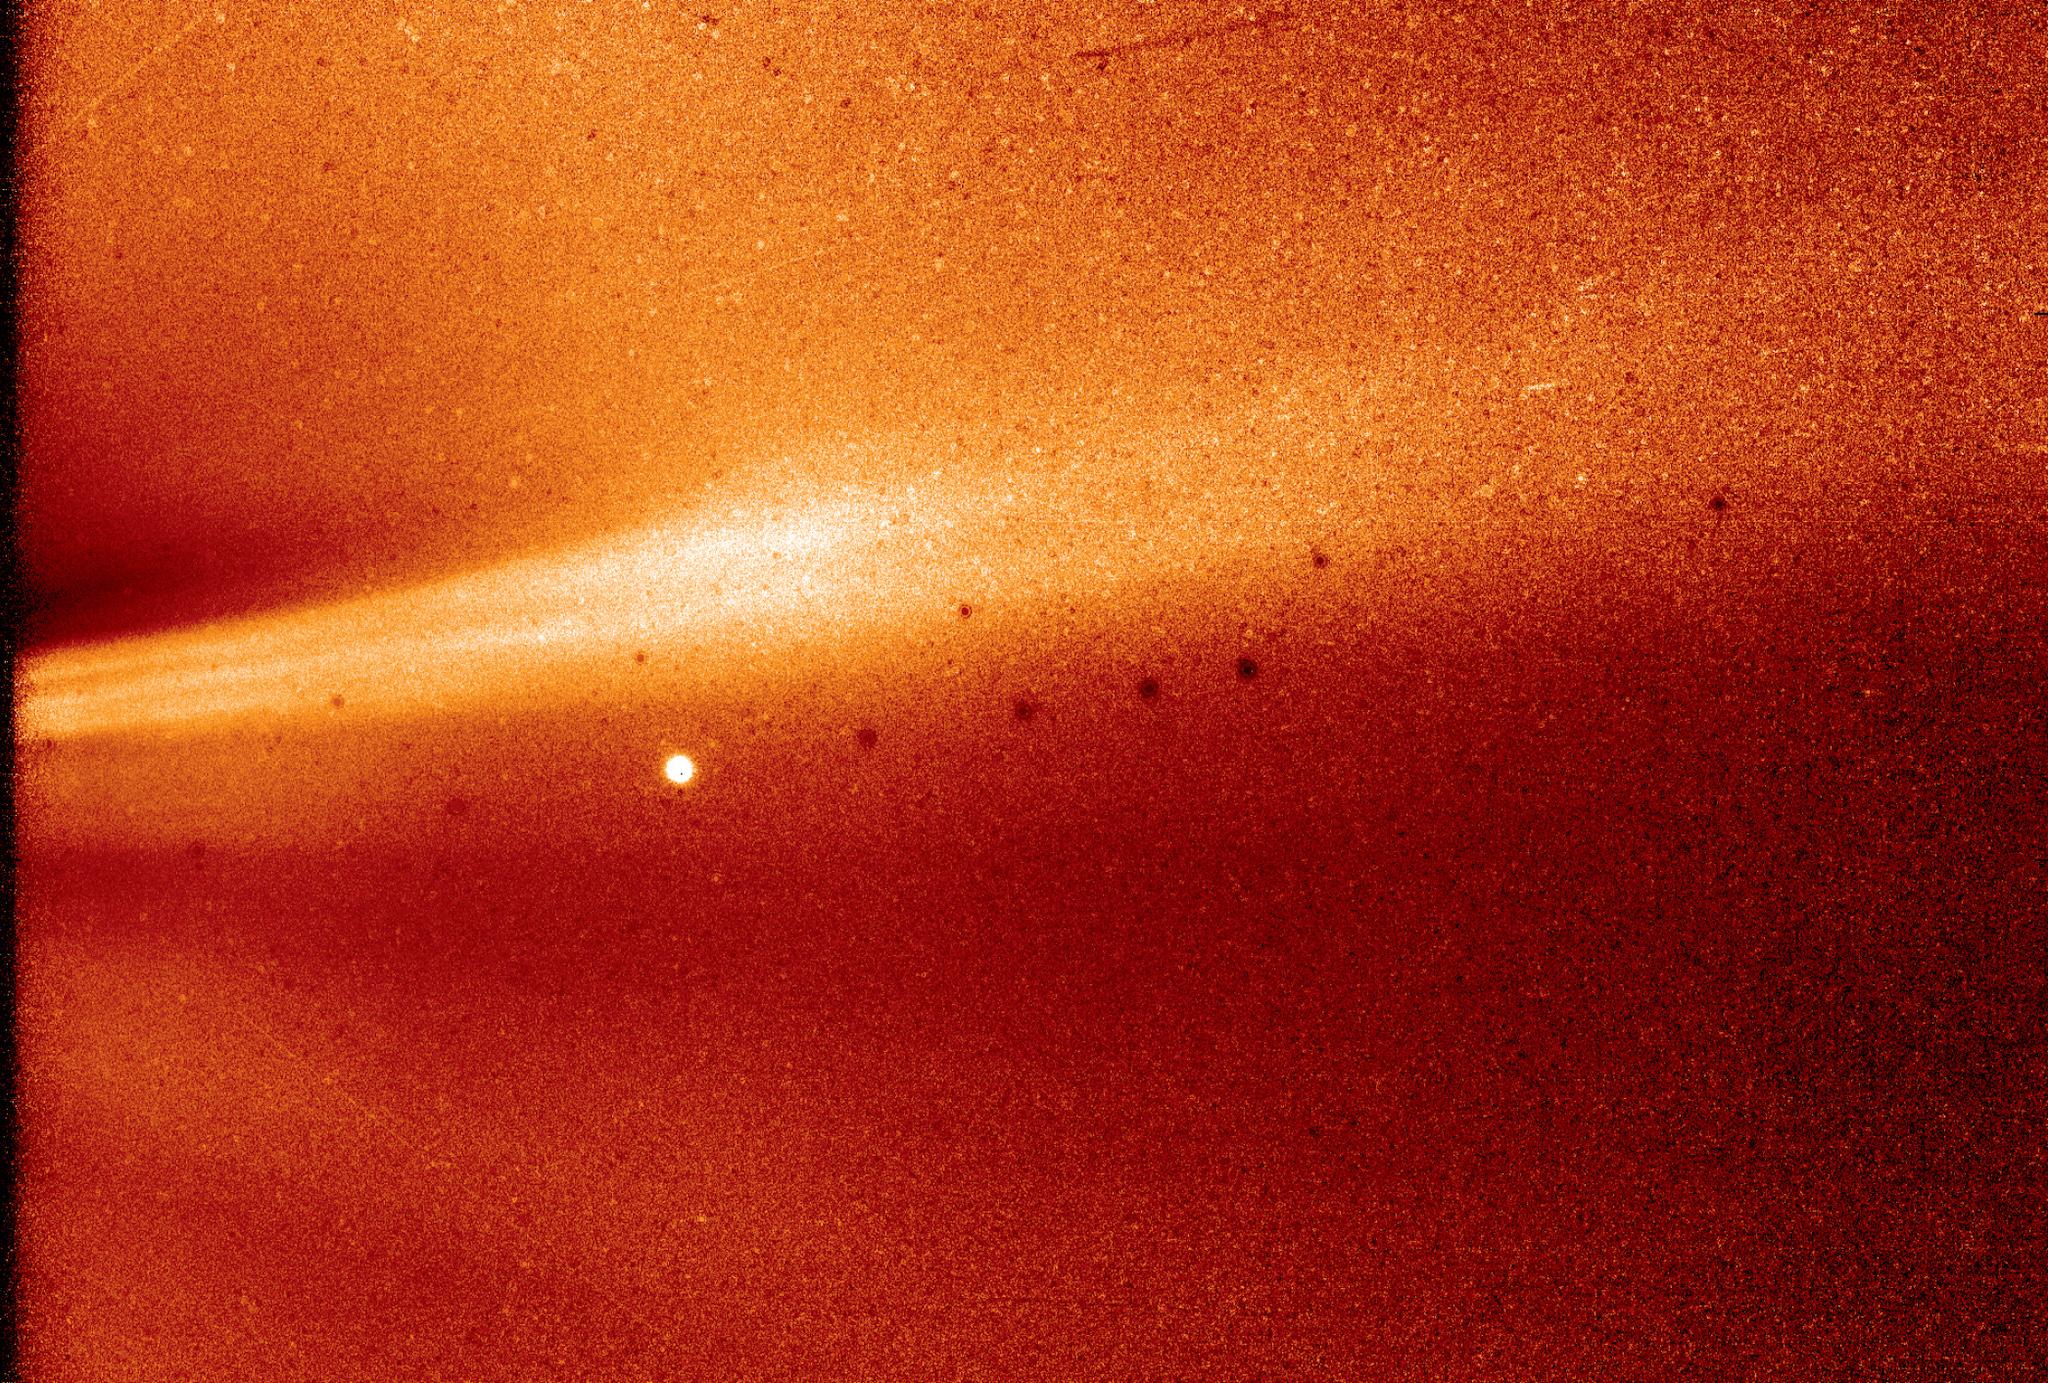 This image from Parker Solar Probe's WISPR (Wide-field Imager for Solar Probe) instrument shows a coronal streamer, seen over the east limb of the Sun